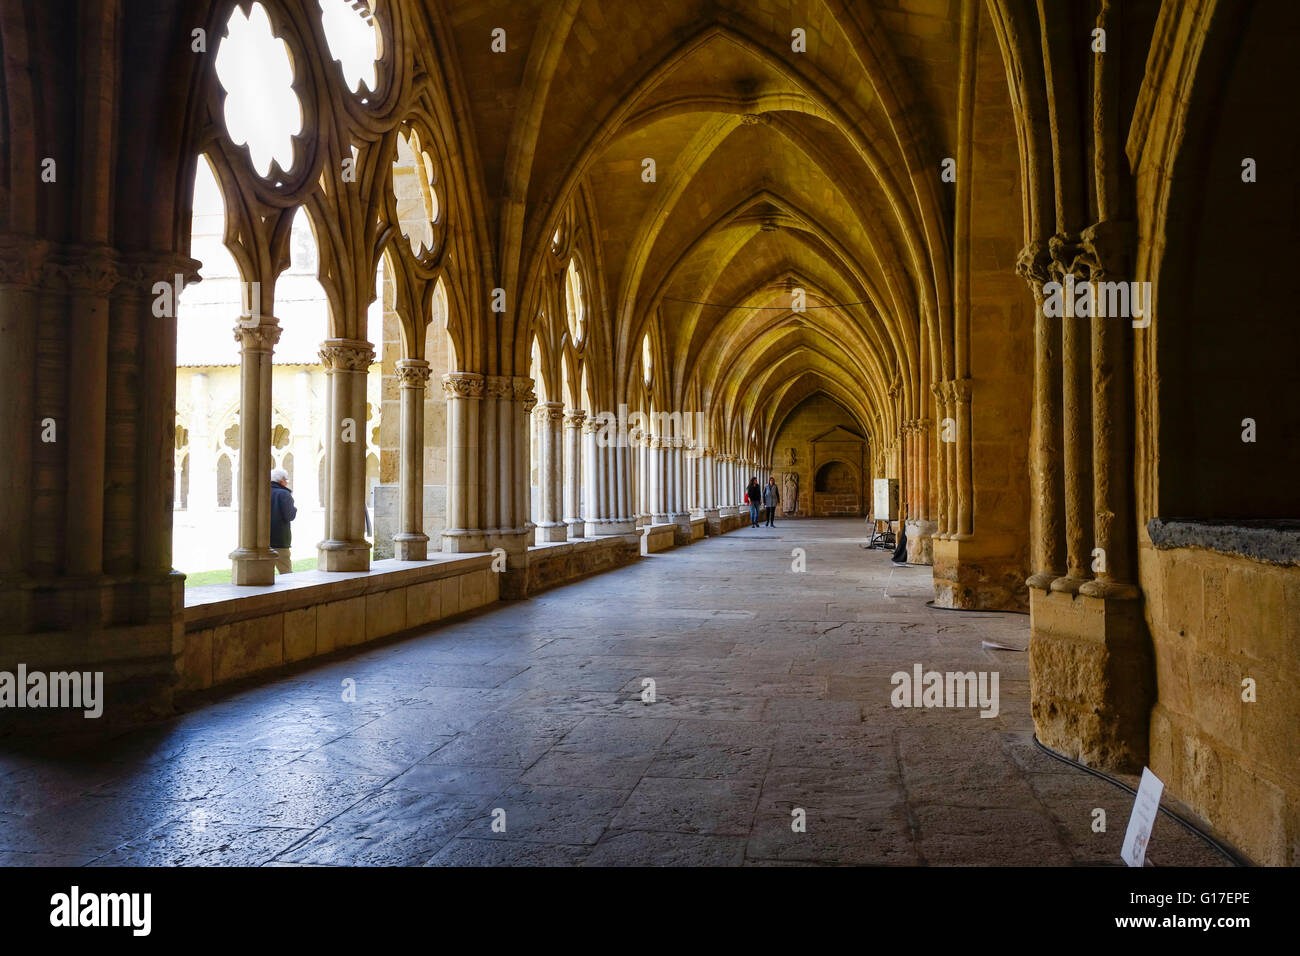 Cloisters at the Cathedral of Sainte-Marie de Bayonne, Aquitaine, France. Stock Photo